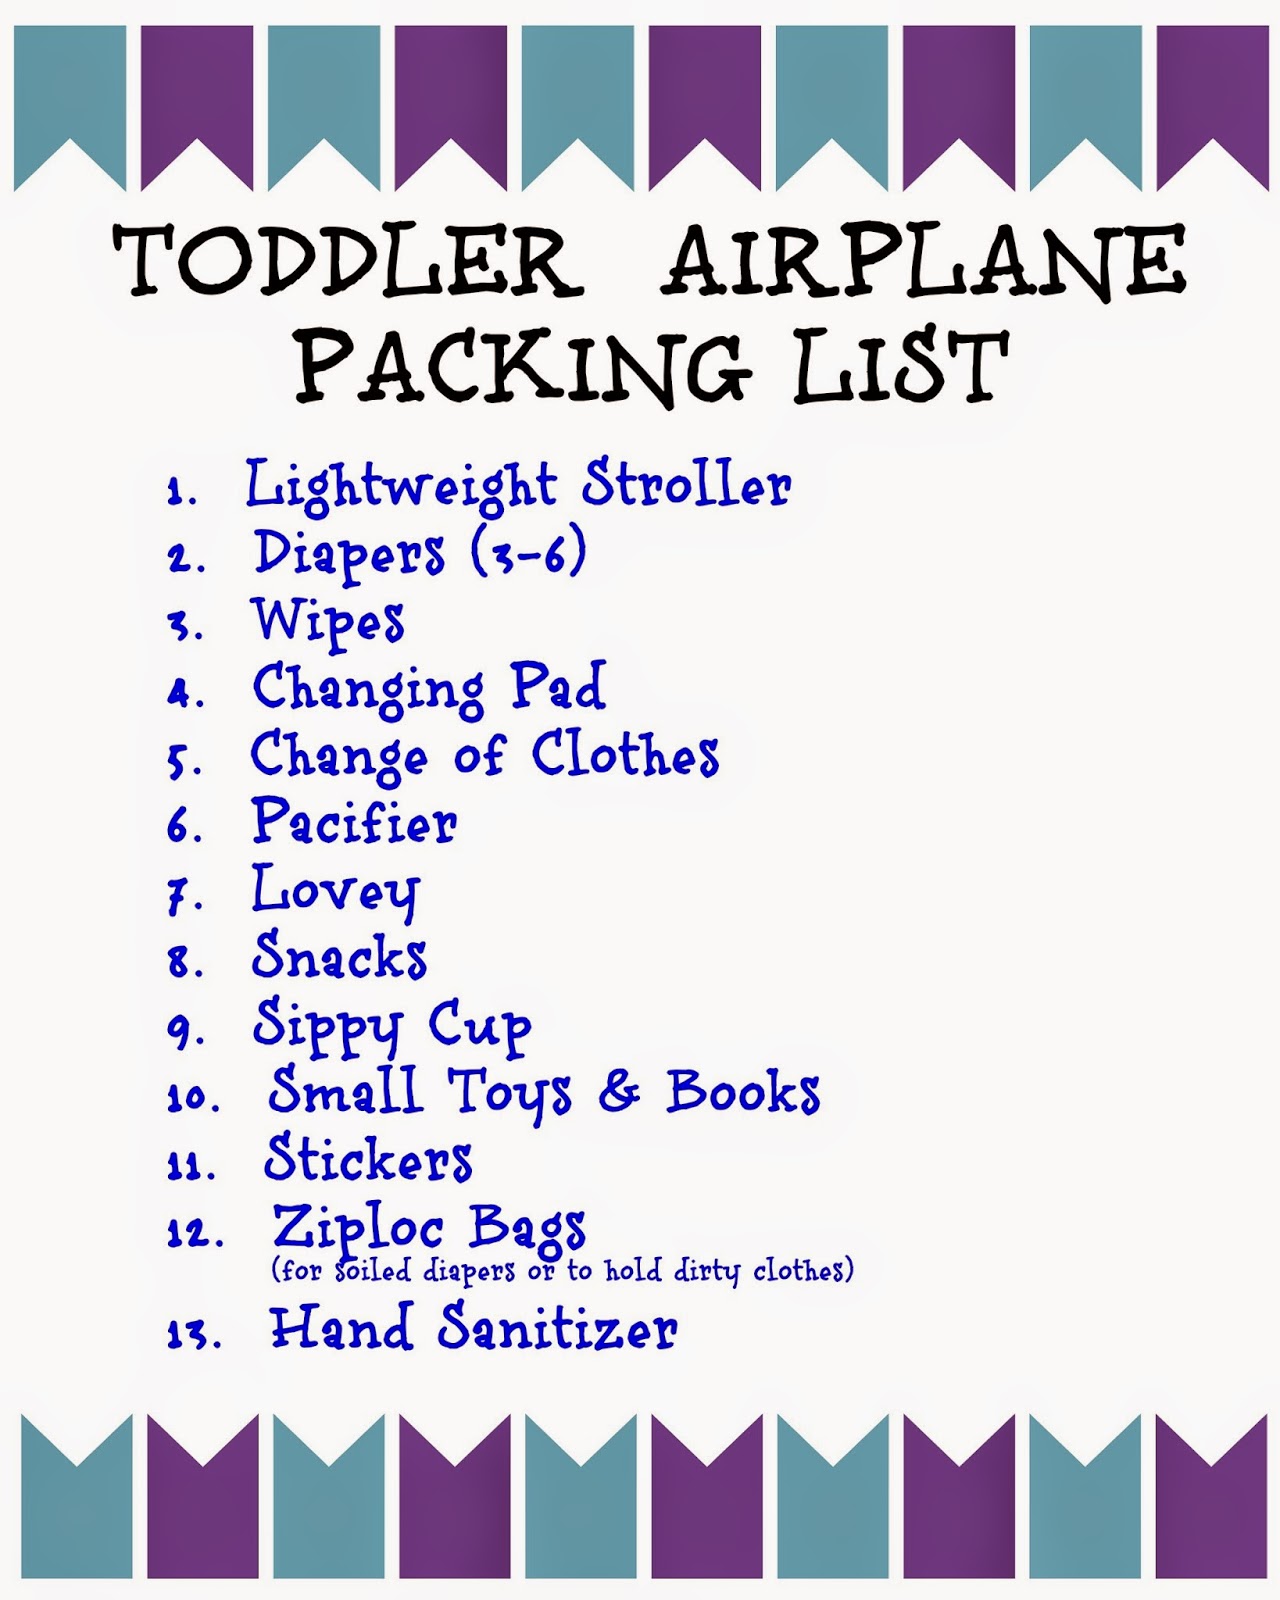 Tips and Tricks for Traveling with Kids - The Chirping Moms